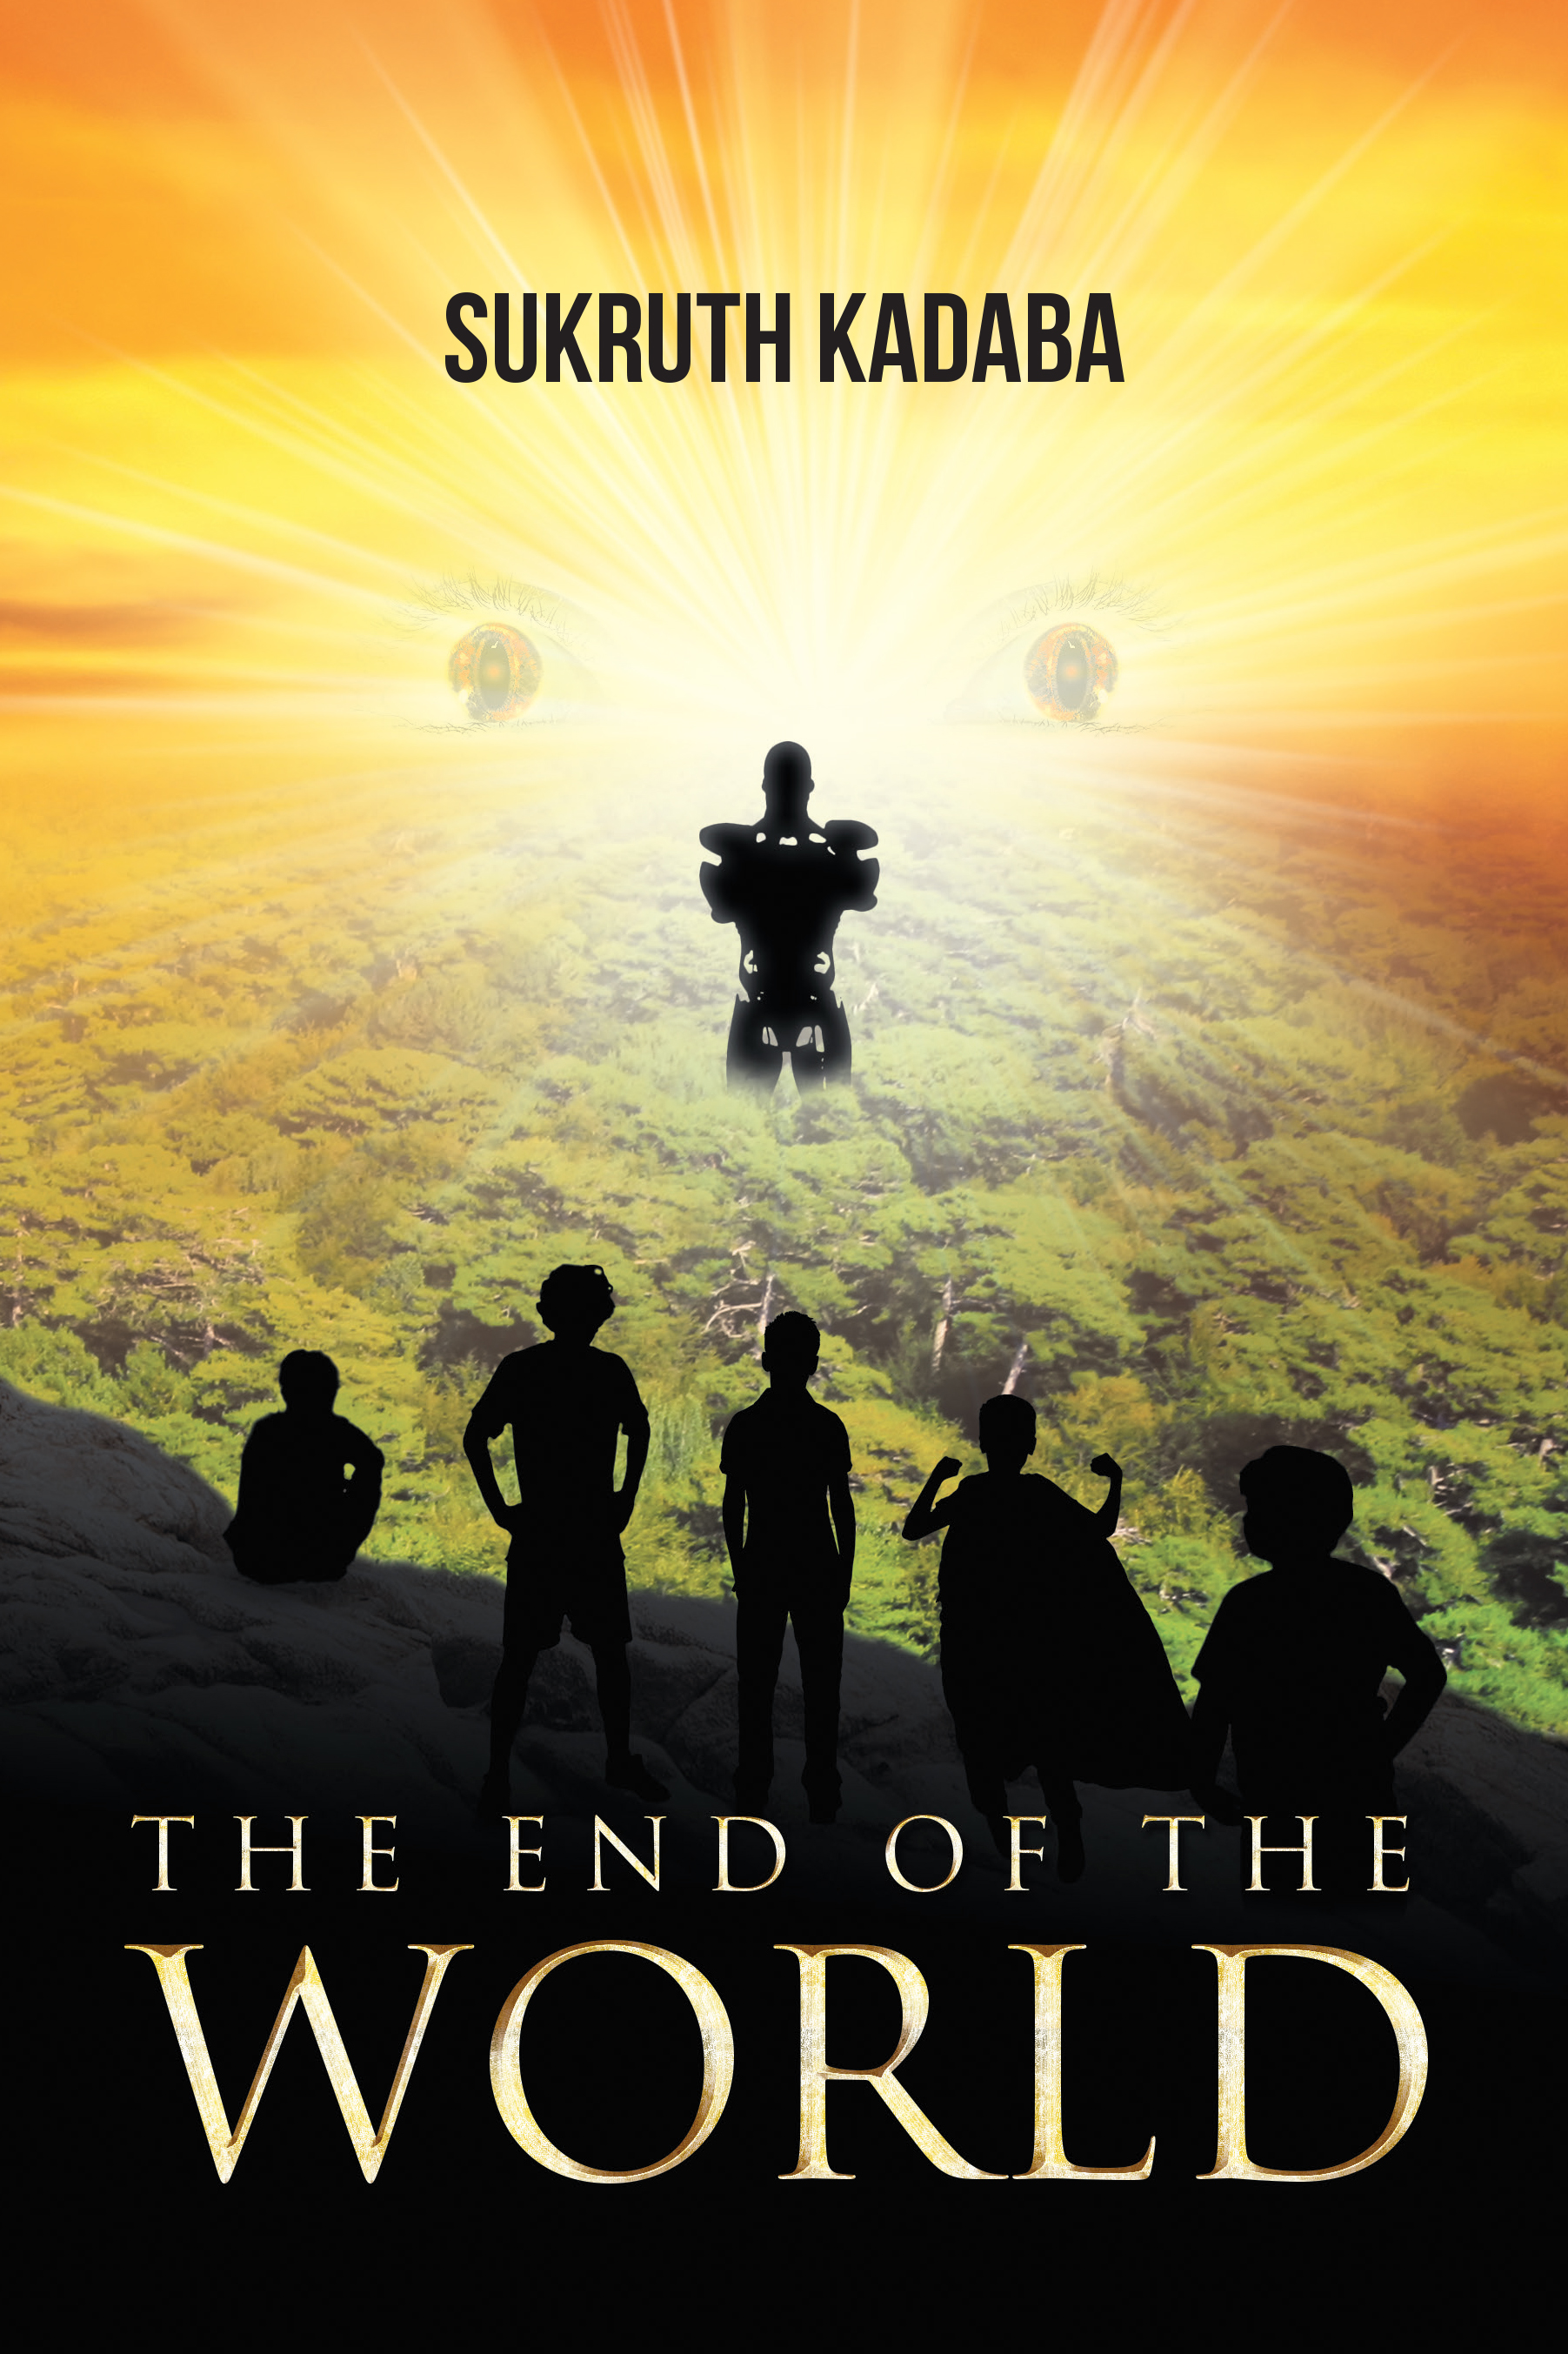 The End of the World Cover Image